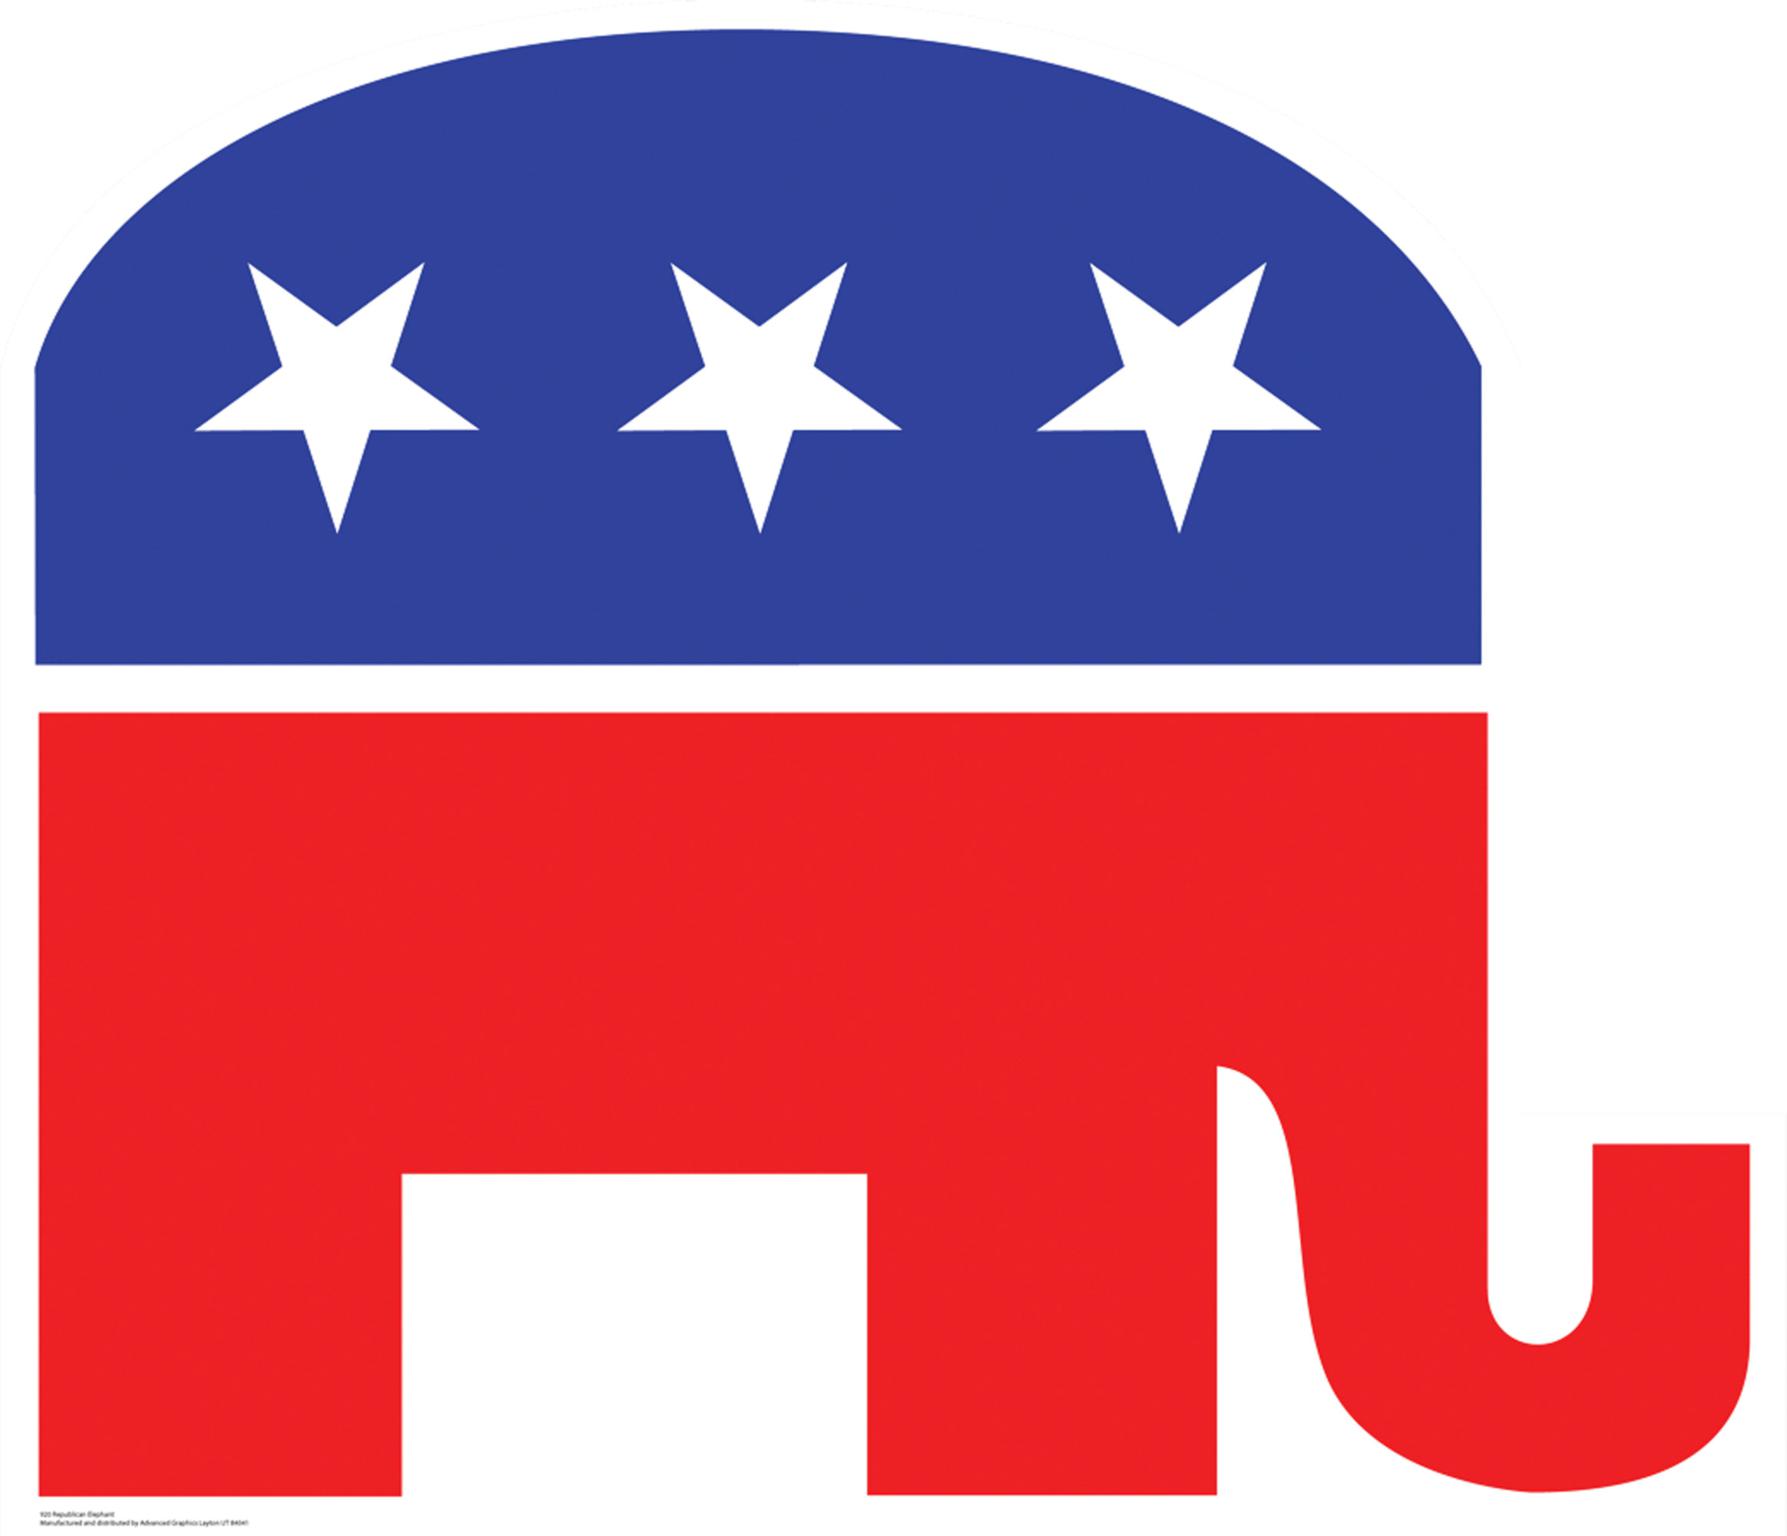 Picture Of Republican Elephant | Free Download Clip Art | Free ...